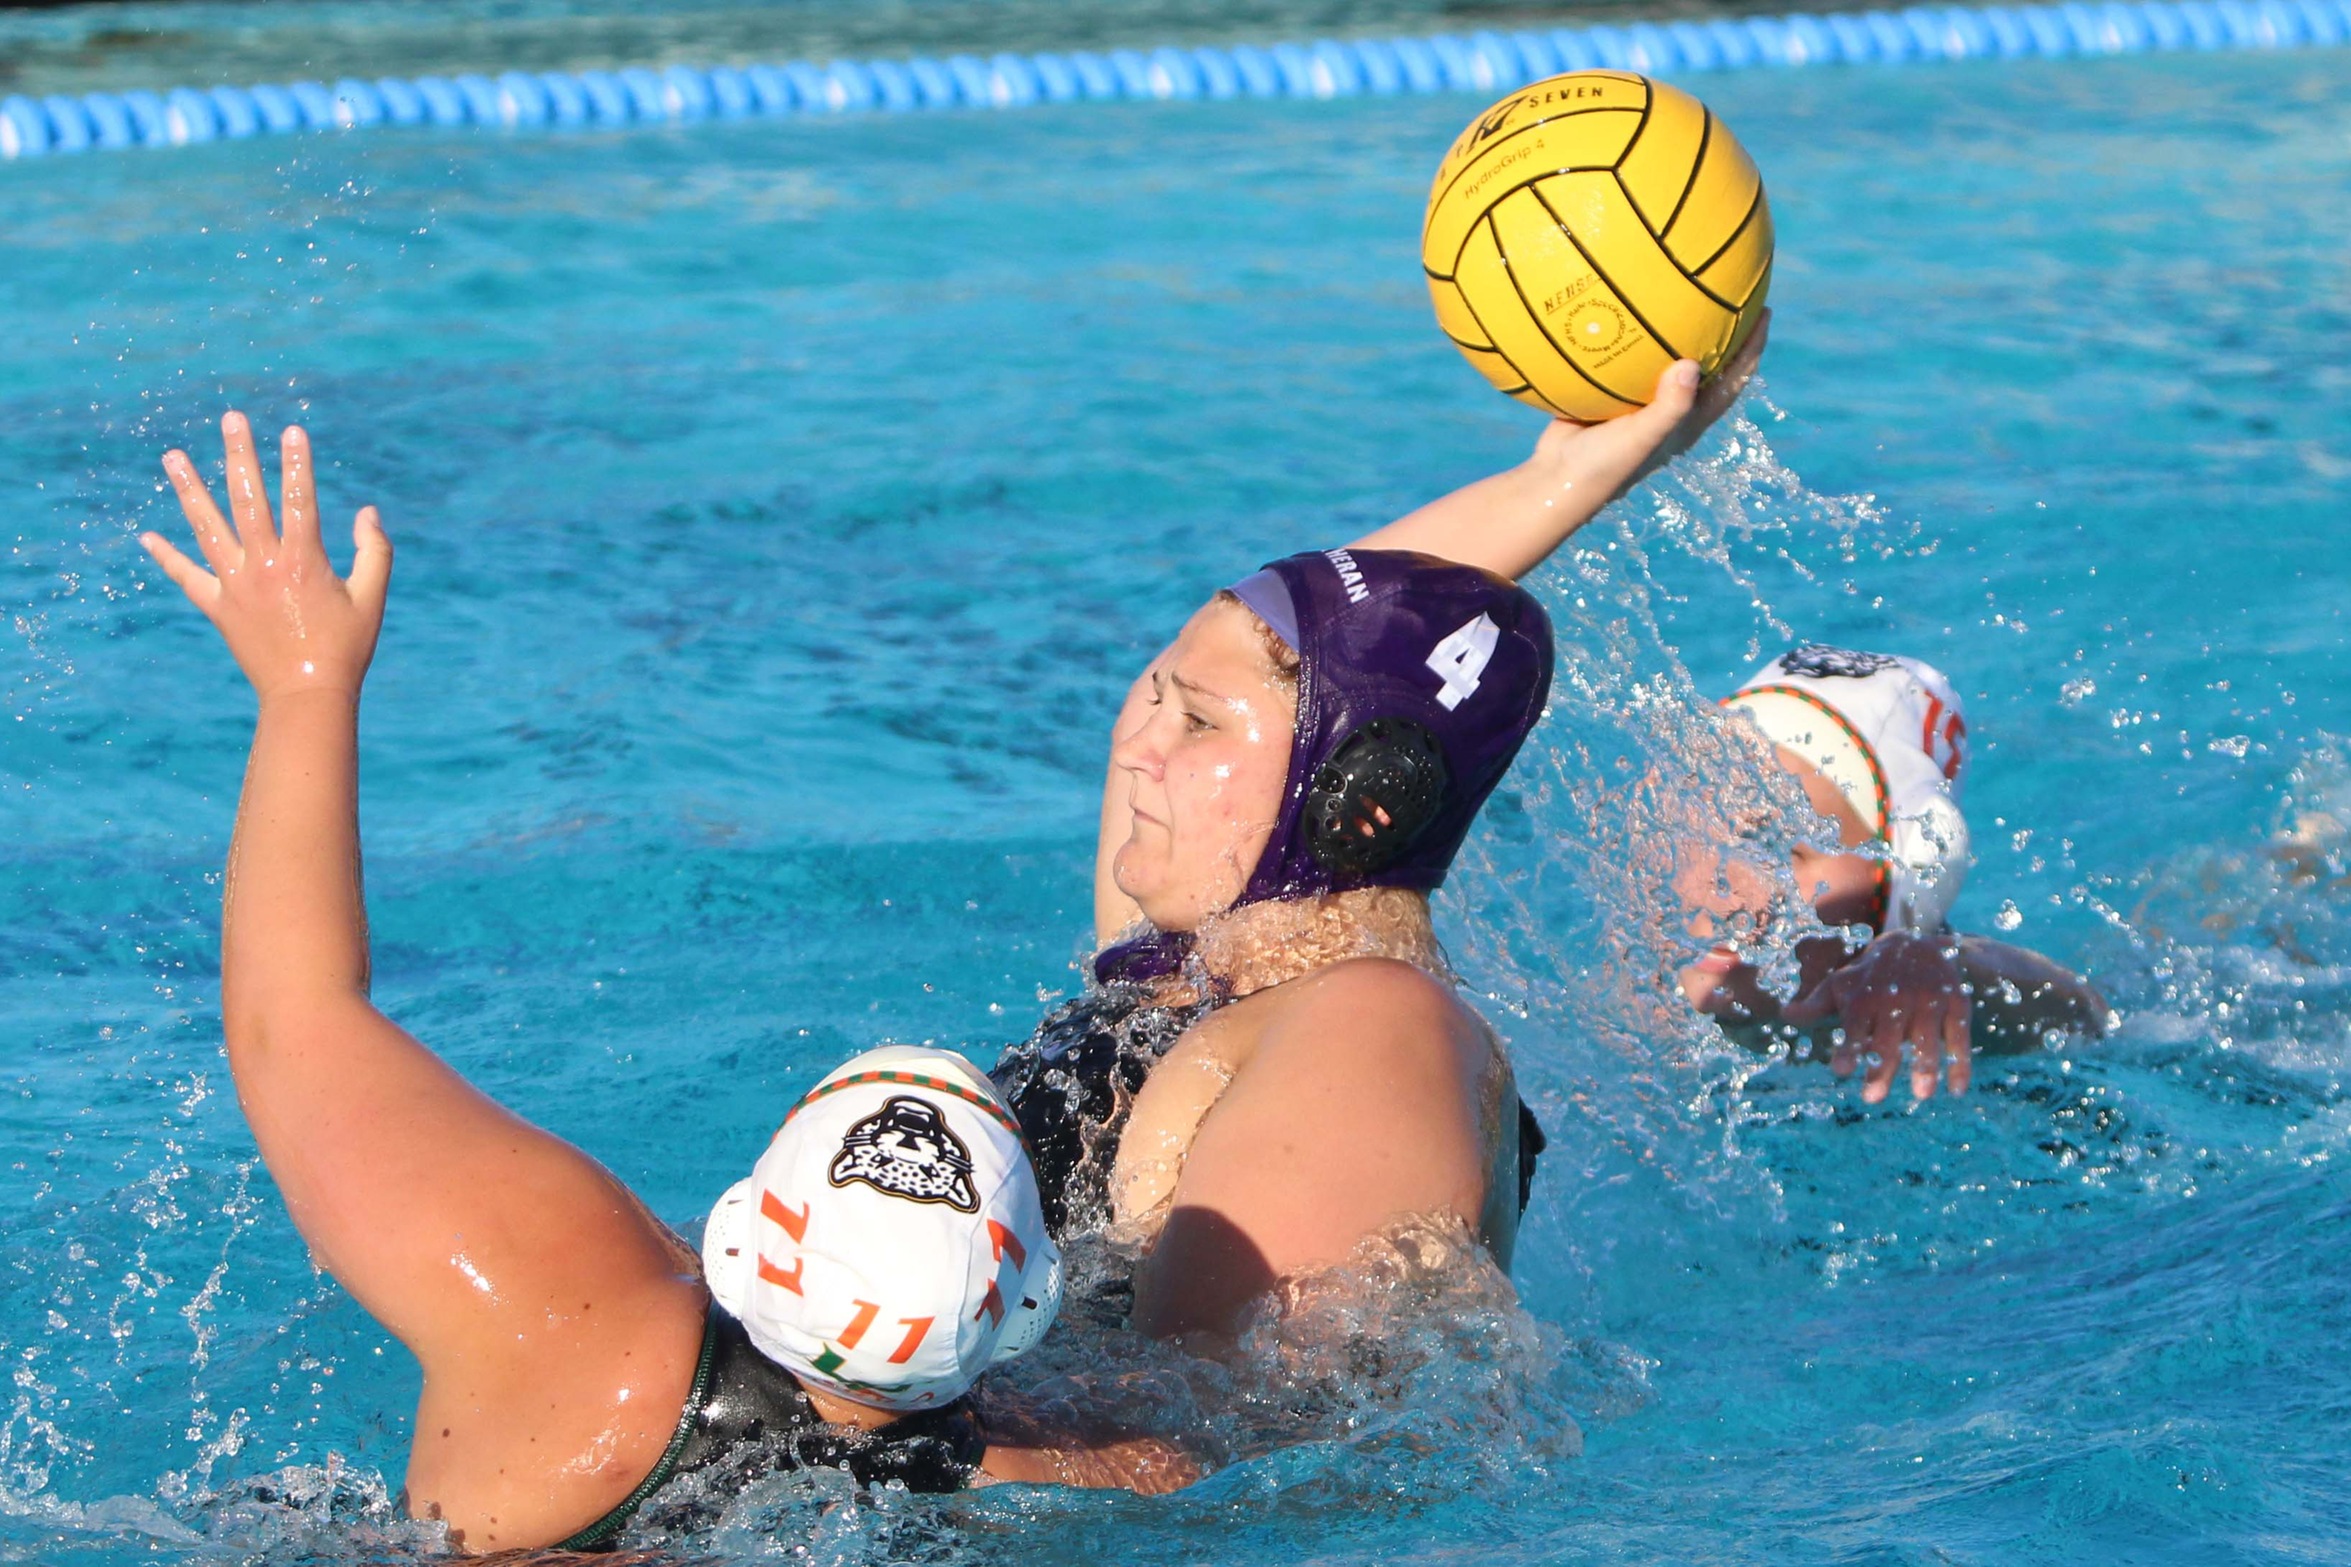 Regals Cruise Past Beavers for Sixth Straight Win; Knight Tallies Five Goals